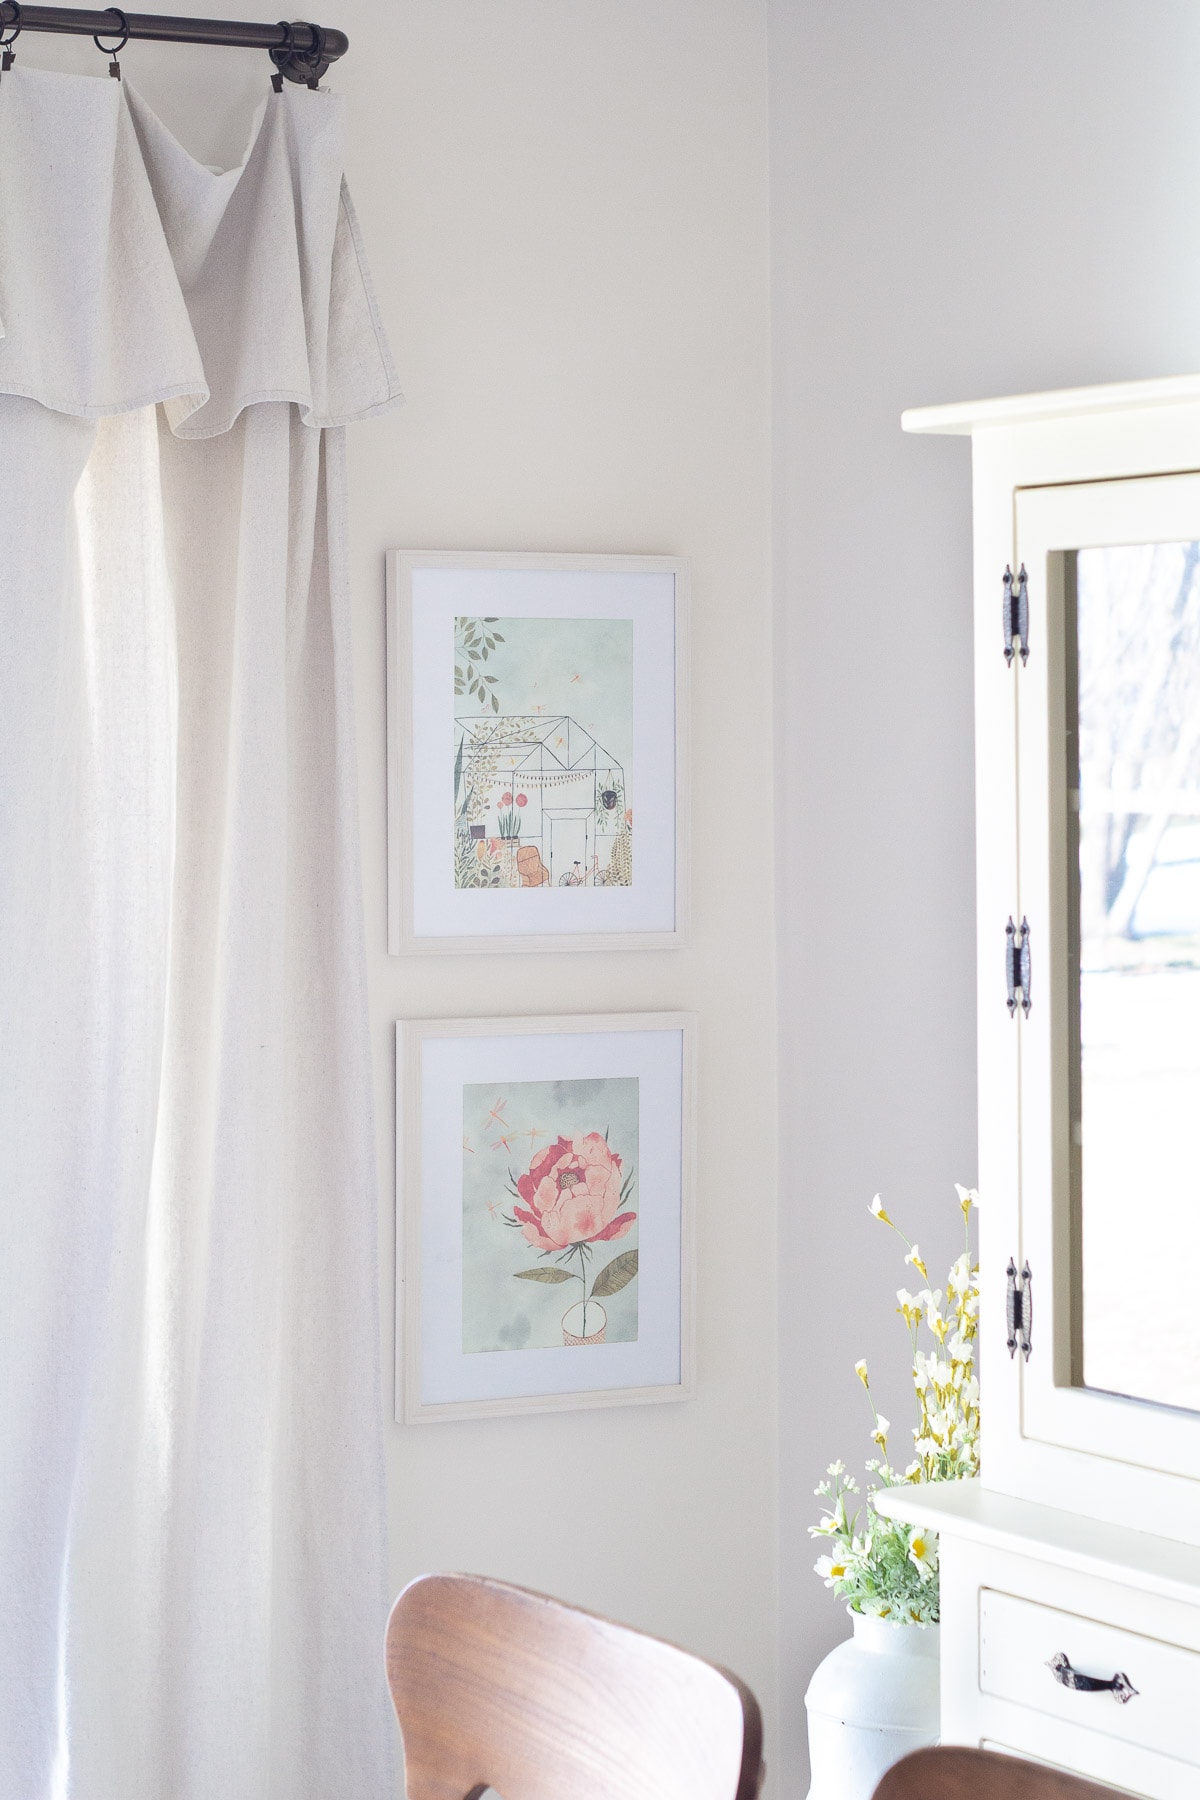 Art by Cécile Metzger from a children's book and repurposed in two white frames.